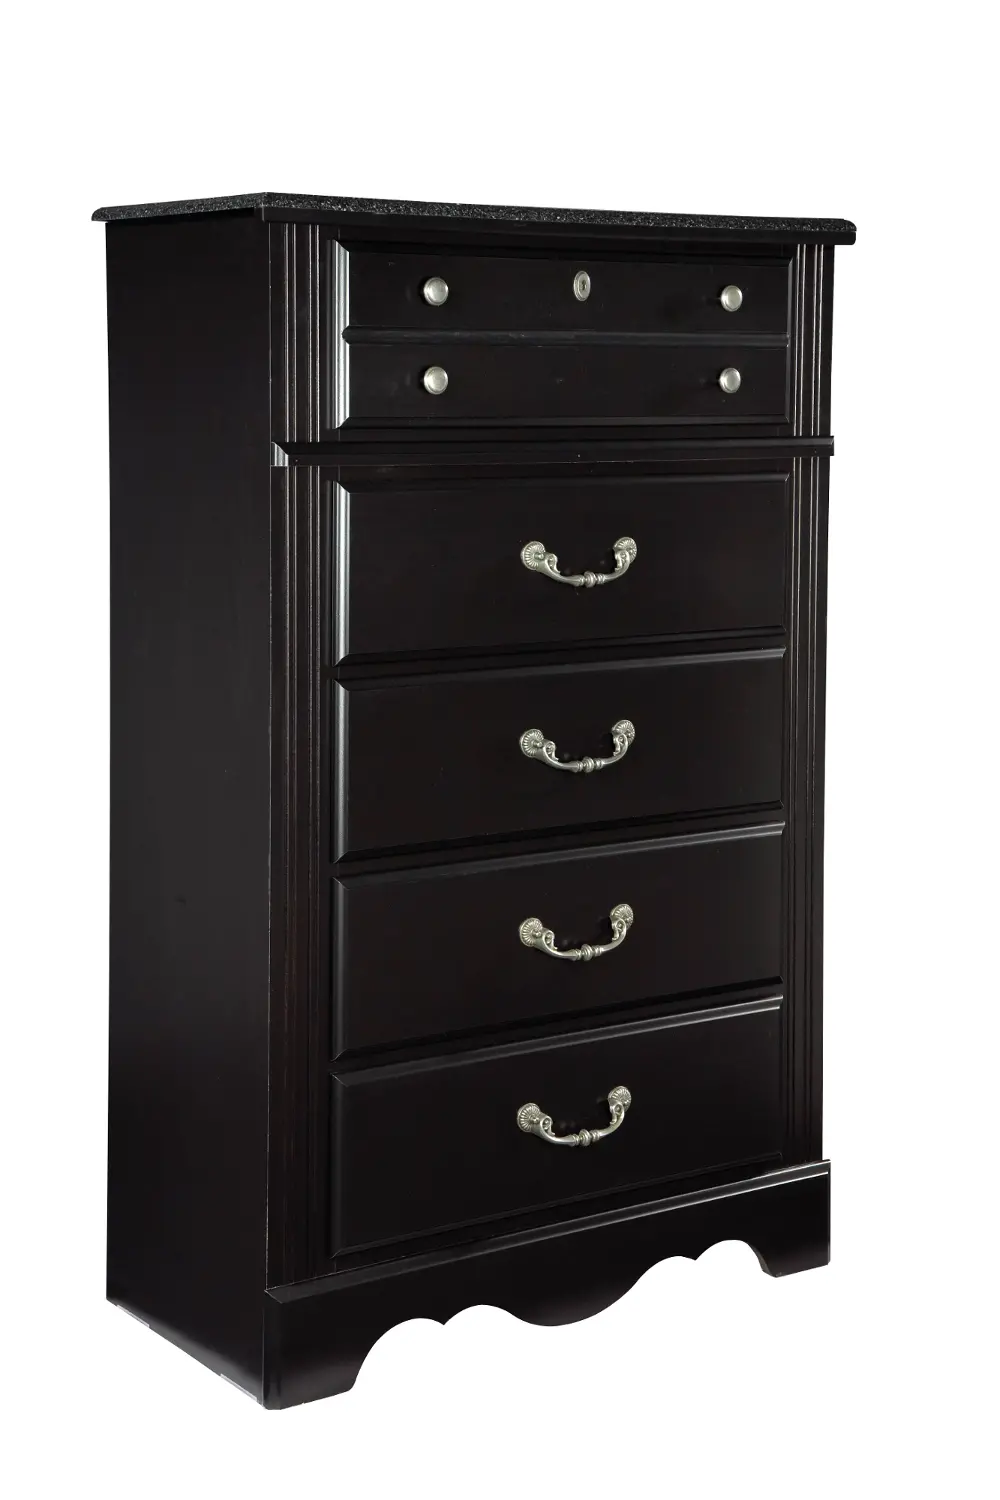 Black Traditional Chest of Drawers - Madera-1